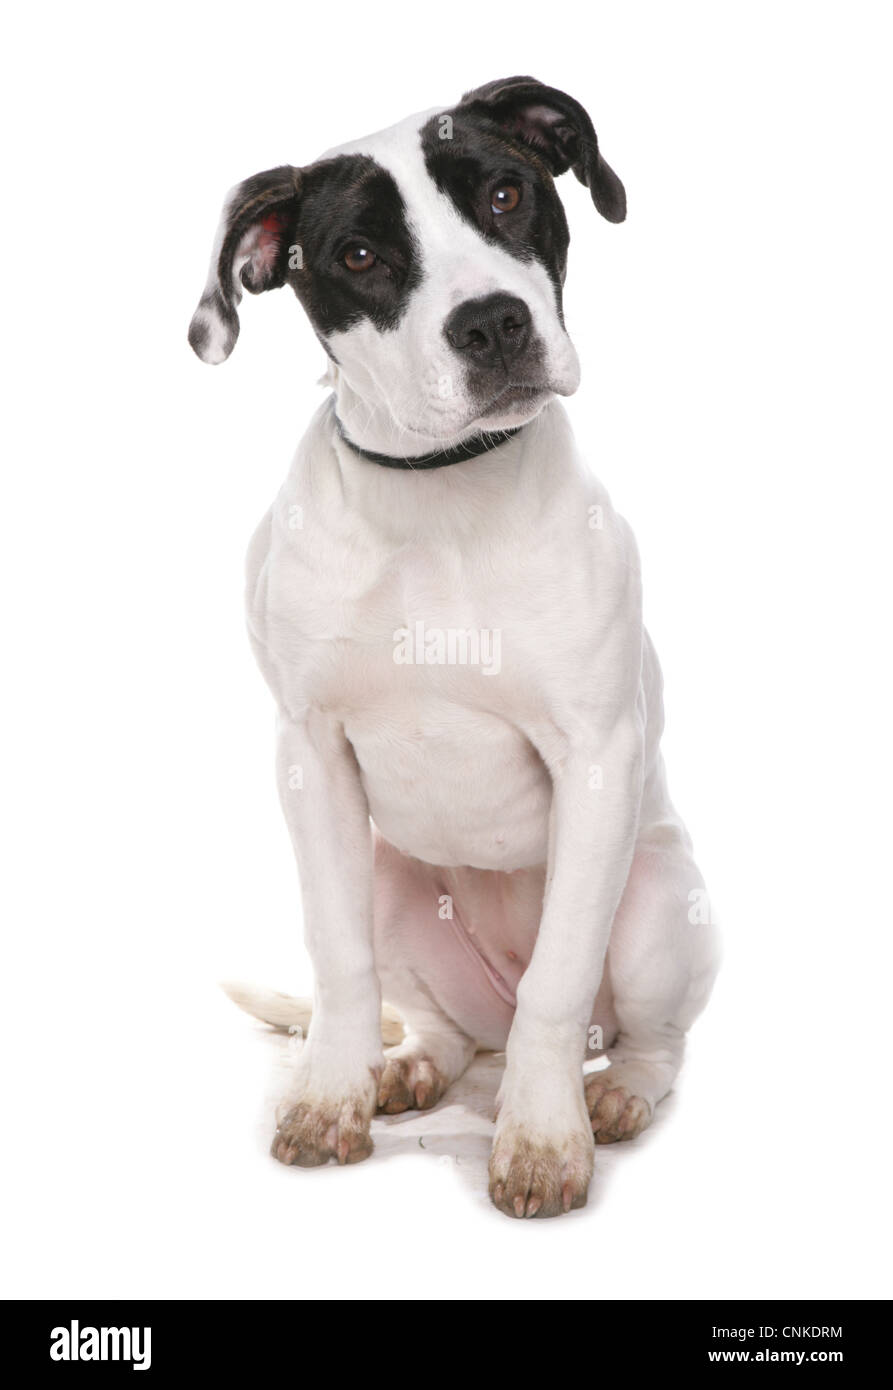 Domestic Dog, Staffordshire Bull Terrier type, puppy, sitting Stock Photo